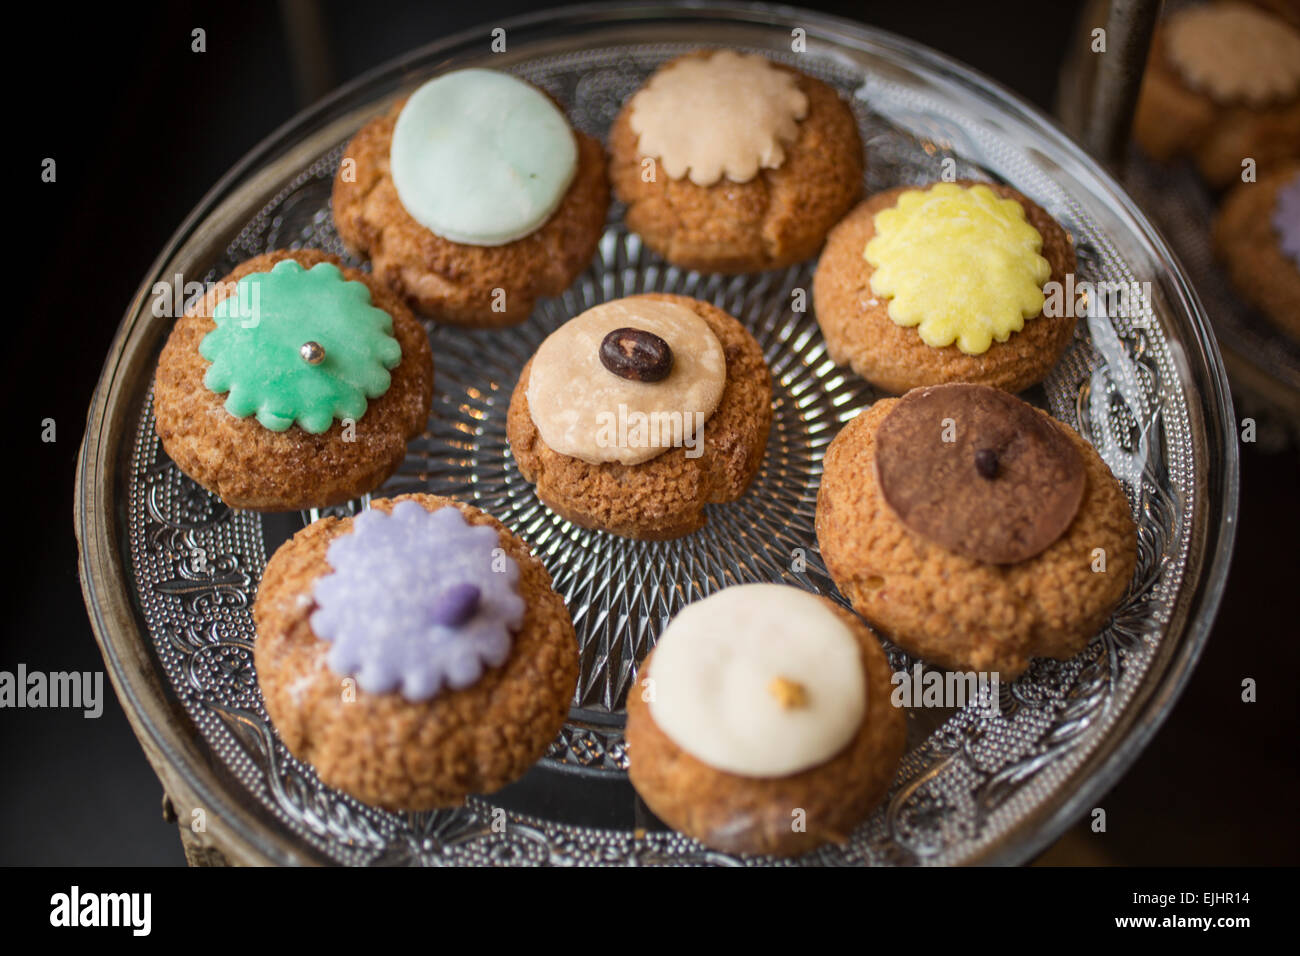 Cream puffs on dishes, Odette pastry shop, Paris, France Stock Photo